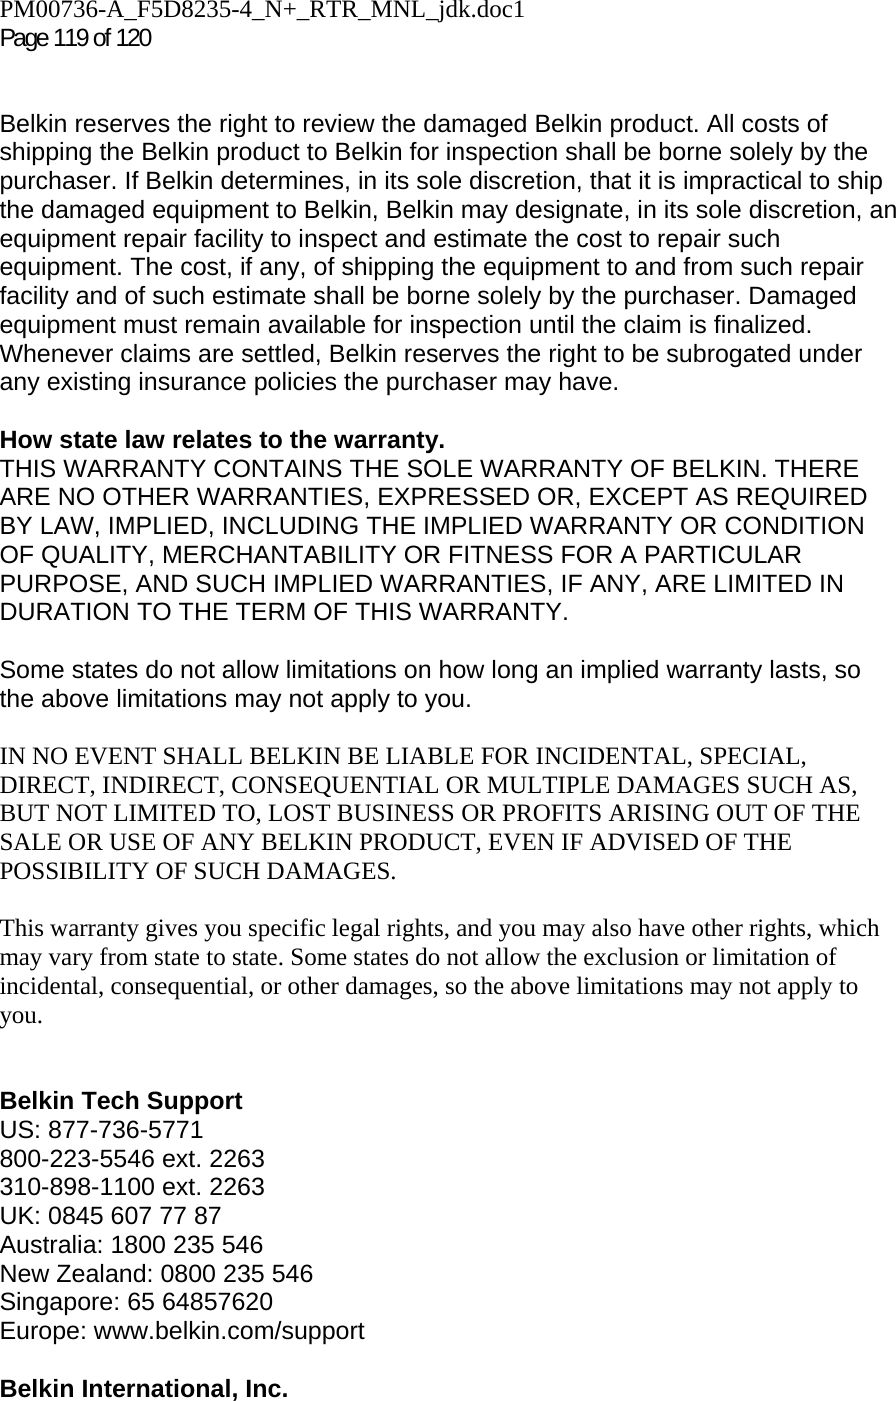 PM00736-A_F5D8235-4_N+_RTR_MNL_jdk.doc1  Page 119 of 120    Belkin reserves the right to review the damaged Belkin product. All costs of shipping the Belkin product to Belkin for inspection shall be borne solely by the purchaser. If Belkin determines, in its sole discretion, that it is impractical to ship the damaged equipment to Belkin, Belkin may designate, in its sole discretion, an equipment repair facility to inspect and estimate the cost to repair such equipment. The cost, if any, of shipping the equipment to and from such repair facility and of such estimate shall be borne solely by the purchaser. Damaged equipment must remain available for inspection until the claim is finalized. Whenever claims are settled, Belkin reserves the right to be subrogated under any existing insurance policies the purchaser may have.   How state law relates to the warranty. THIS WARRANTY CONTAINS THE SOLE WARRANTY OF BELKIN. THERE ARE NO OTHER WARRANTIES, EXPRESSED OR, EXCEPT AS REQUIRED BY LAW, IMPLIED, INCLUDING THE IMPLIED WARRANTY OR CONDITION OF QUALITY, MERCHANTABILITY OR FITNESS FOR A PARTICULAR PURPOSE, AND SUCH IMPLIED WARRANTIES, IF ANY, ARE LIMITED IN DURATION TO THE TERM OF THIS WARRANTY.   Some states do not allow limitations on how long an implied warranty lasts, so the above limitations may not apply to you.  IN NO EVENT SHALL BELKIN BE LIABLE FOR INCIDENTAL, SPECIAL, DIRECT, INDIRECT, CONSEQUENTIAL OR MULTIPLE DAMAGES SUCH AS, BUT NOT LIMITED TO, LOST BUSINESS OR PROFITS ARISING OUT OF THE SALE OR USE OF ANY BELKIN PRODUCT, EVEN IF ADVISED OF THE POSSIBILITY OF SUCH DAMAGES.   This warranty gives you specific legal rights, and you may also have other rights, which may vary from state to state. Some states do not allow the exclusion or limitation of incidental, consequential, or other damages, so the above limitations may not apply to you.   Belkin Tech Support US: 877-736-5771 800-223-5546 ext. 2263 310-898-1100 ext. 2263 UK: 0845 607 77 87 Australia: 1800 235 546 New Zealand: 0800 235 546 Singapore: 65 64857620 Europe: www.belkin.com/support   Belkin International, Inc. 